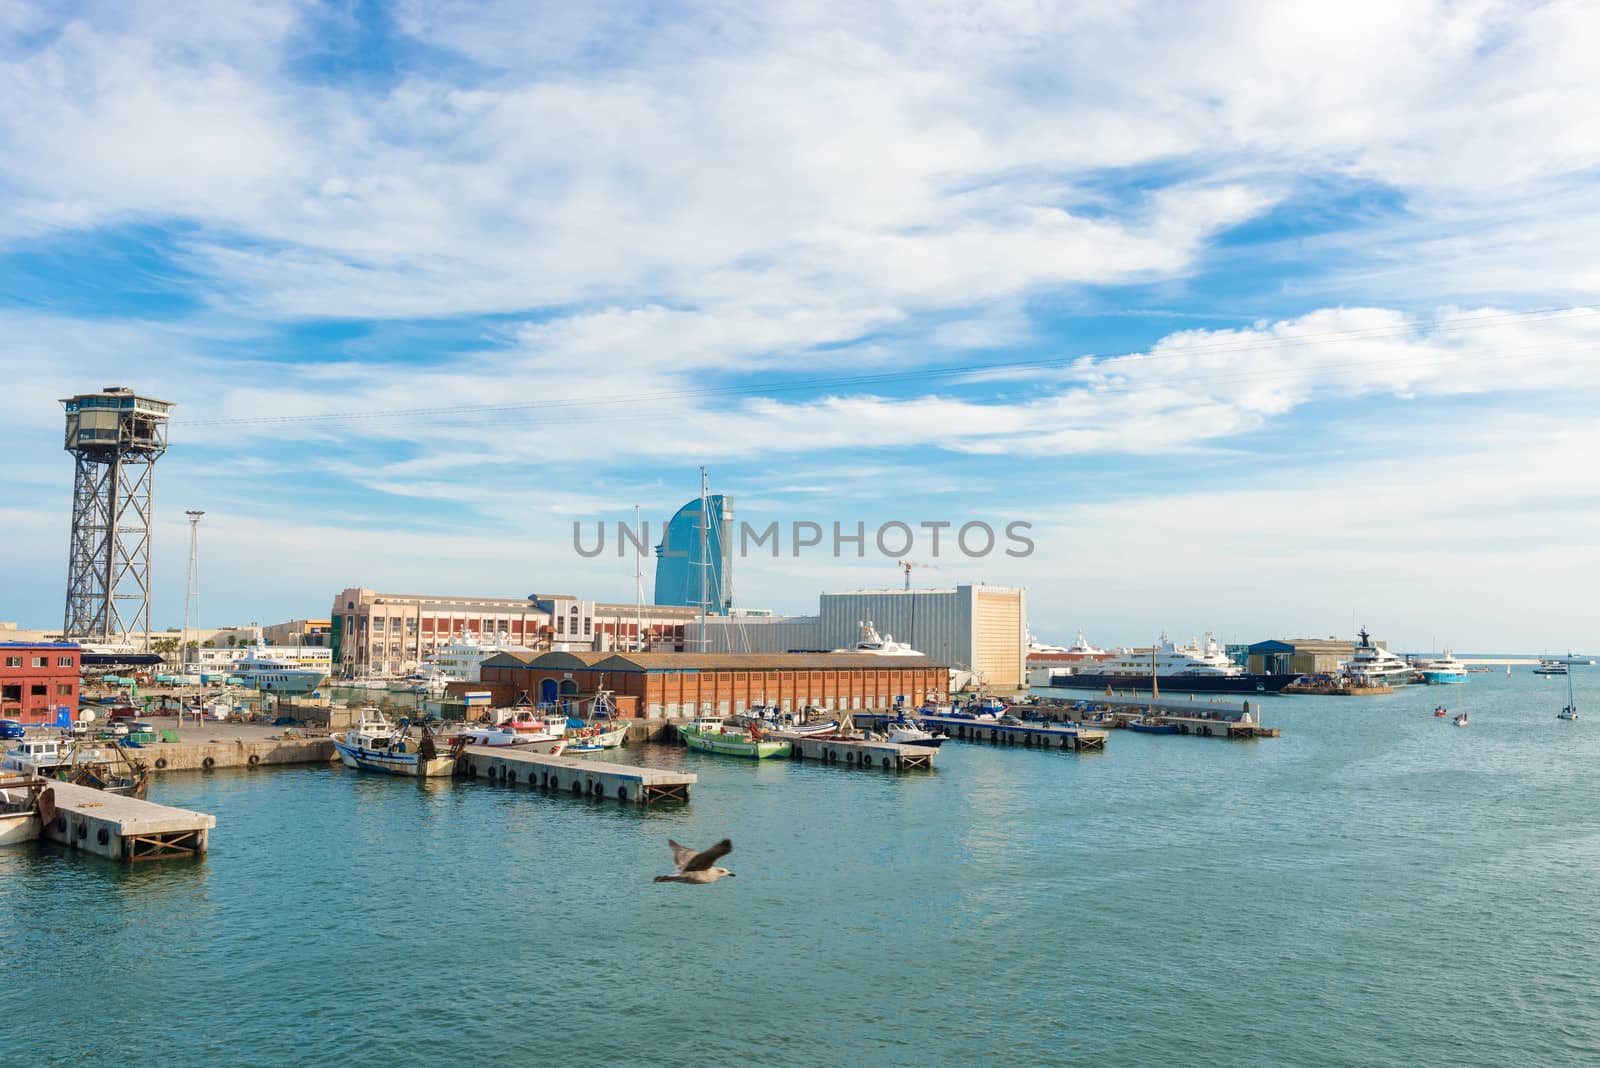 Barcelona, Spain - October 12, 2013: View at the Port and W Barcelona, popularly known as the Hotel Vela (Sail Hotel) due to its shape, is a building designed by Ricardo Bofill is located in the Barceloneta district of Barcelona, in the expansion of the Port of Barcelona. 